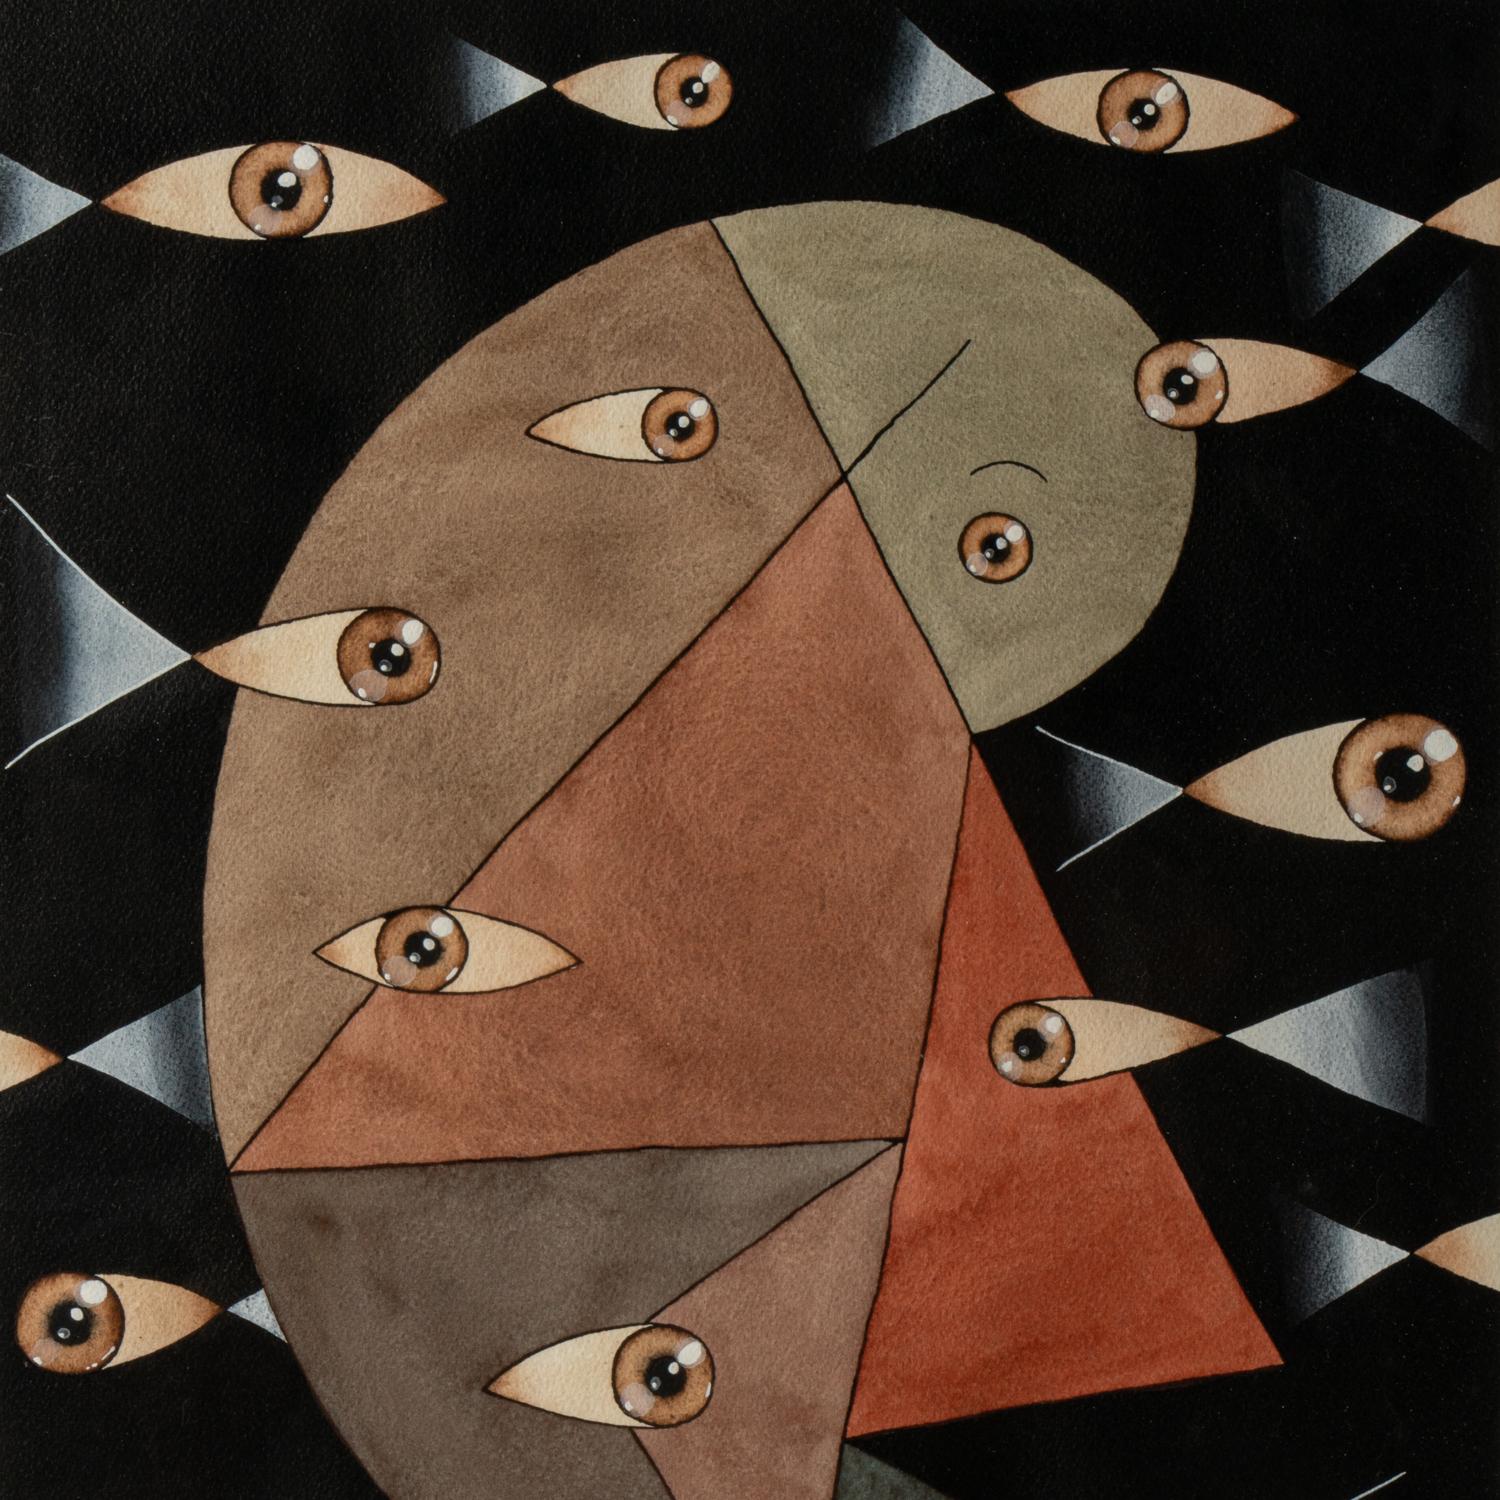 Fondimare, signed.

Gouache, or mixed technique, Surrealist style, suggesting abstract faces and representing eyes, in red and blue tones and on a black
background.

Work realized in the 1980s.